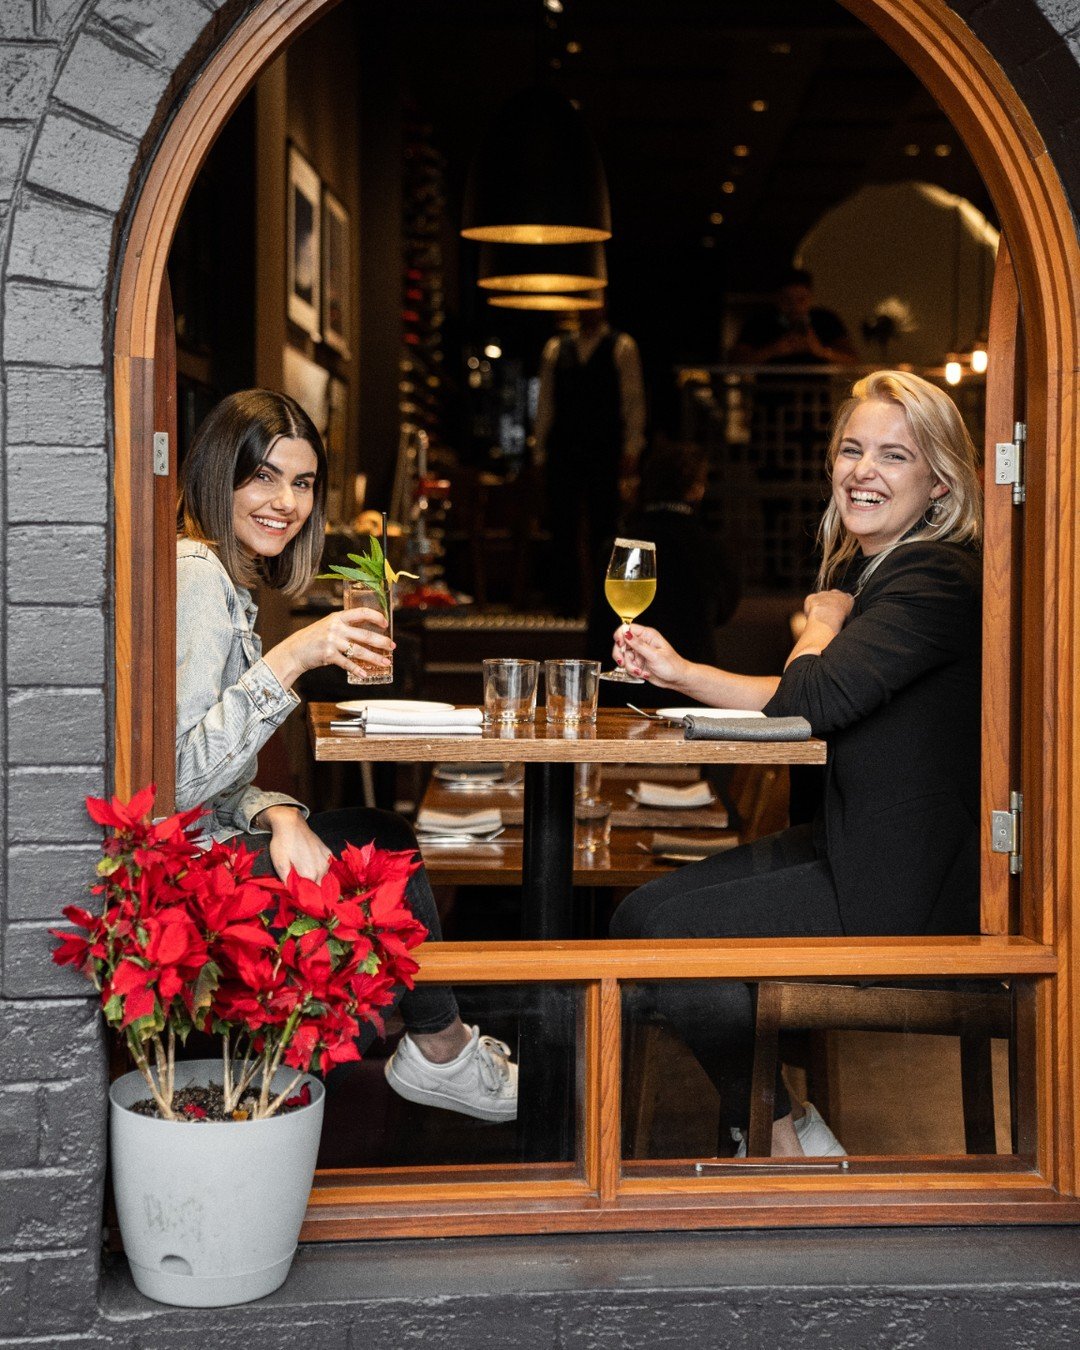 Step into our cozy heaven where good vibes flow as freely as the wine. 🍷✨

The best dining experience north of the Sydney Harbour Bridge.

Annatta Restaurant &amp; Wine Bar
www.annatasydney.com
Crows Nest NSW 2065

#CrownNestSydney #FineDining #Gour